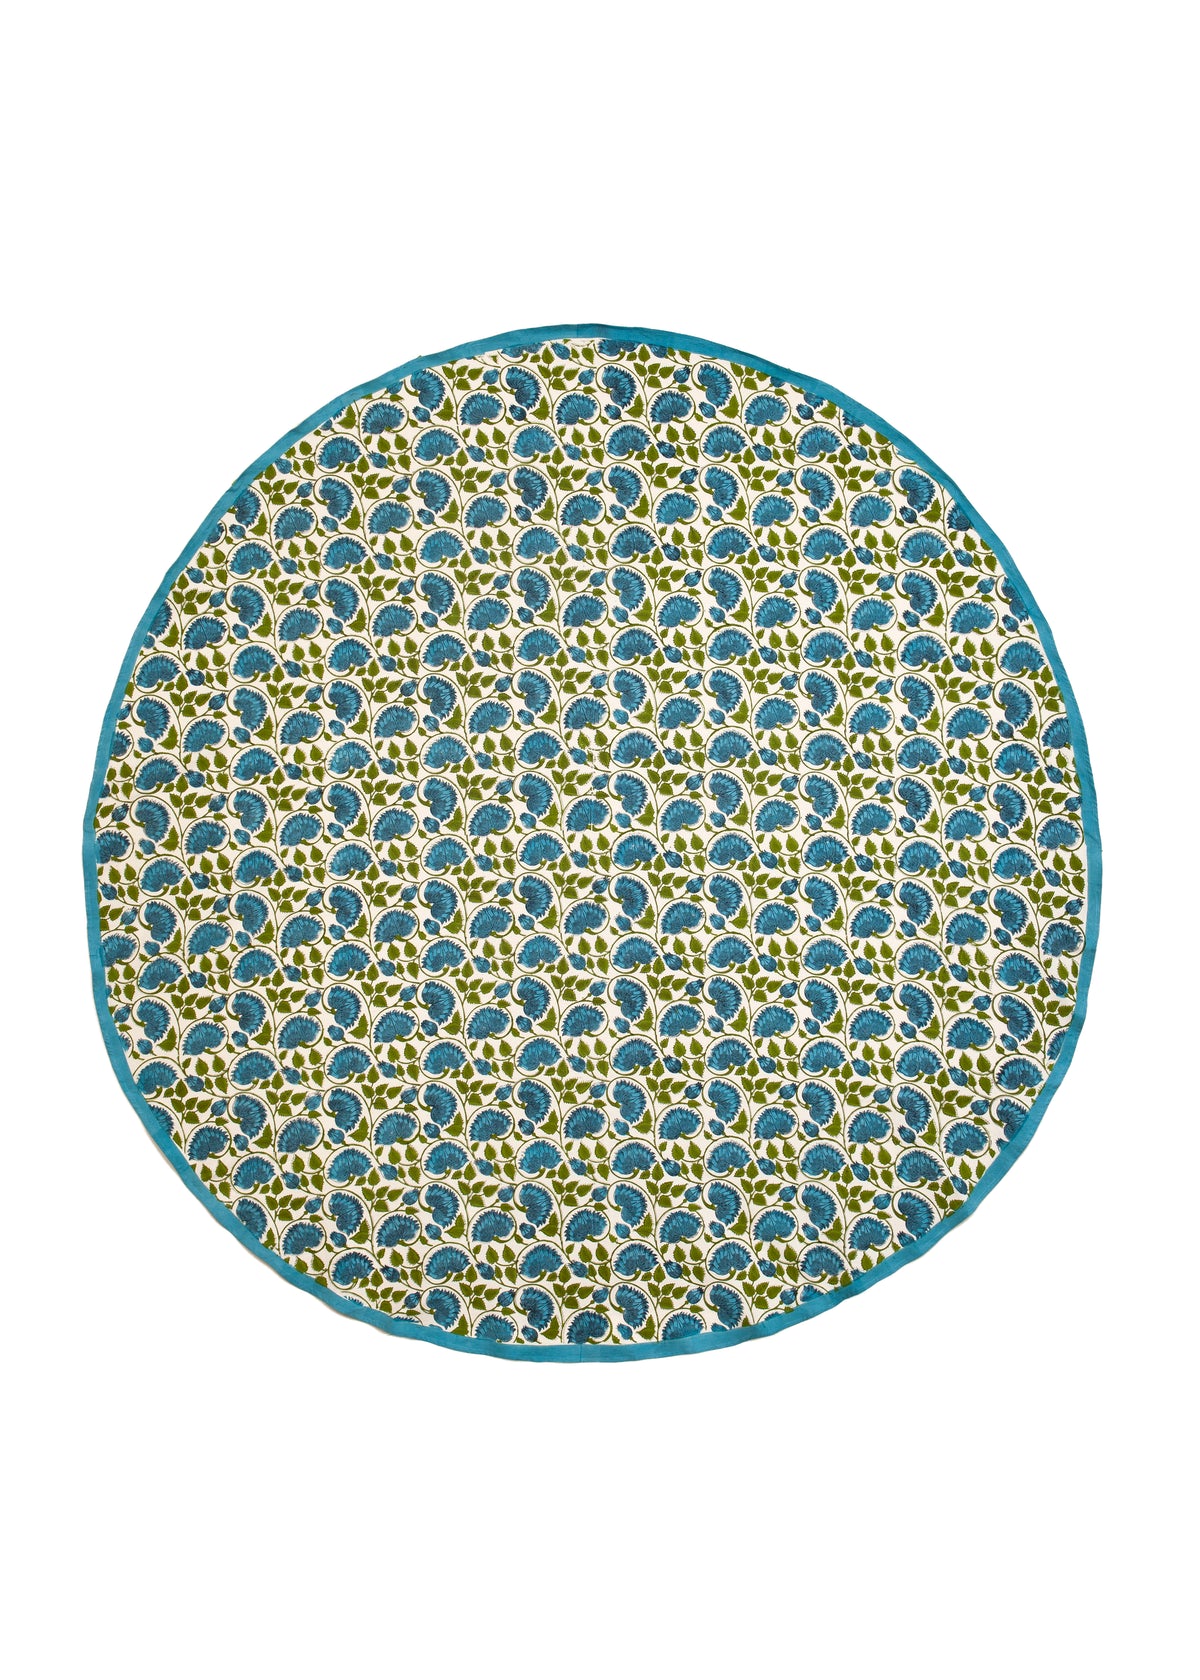 Block Print Round Tablecloth in Blue and Green 108"